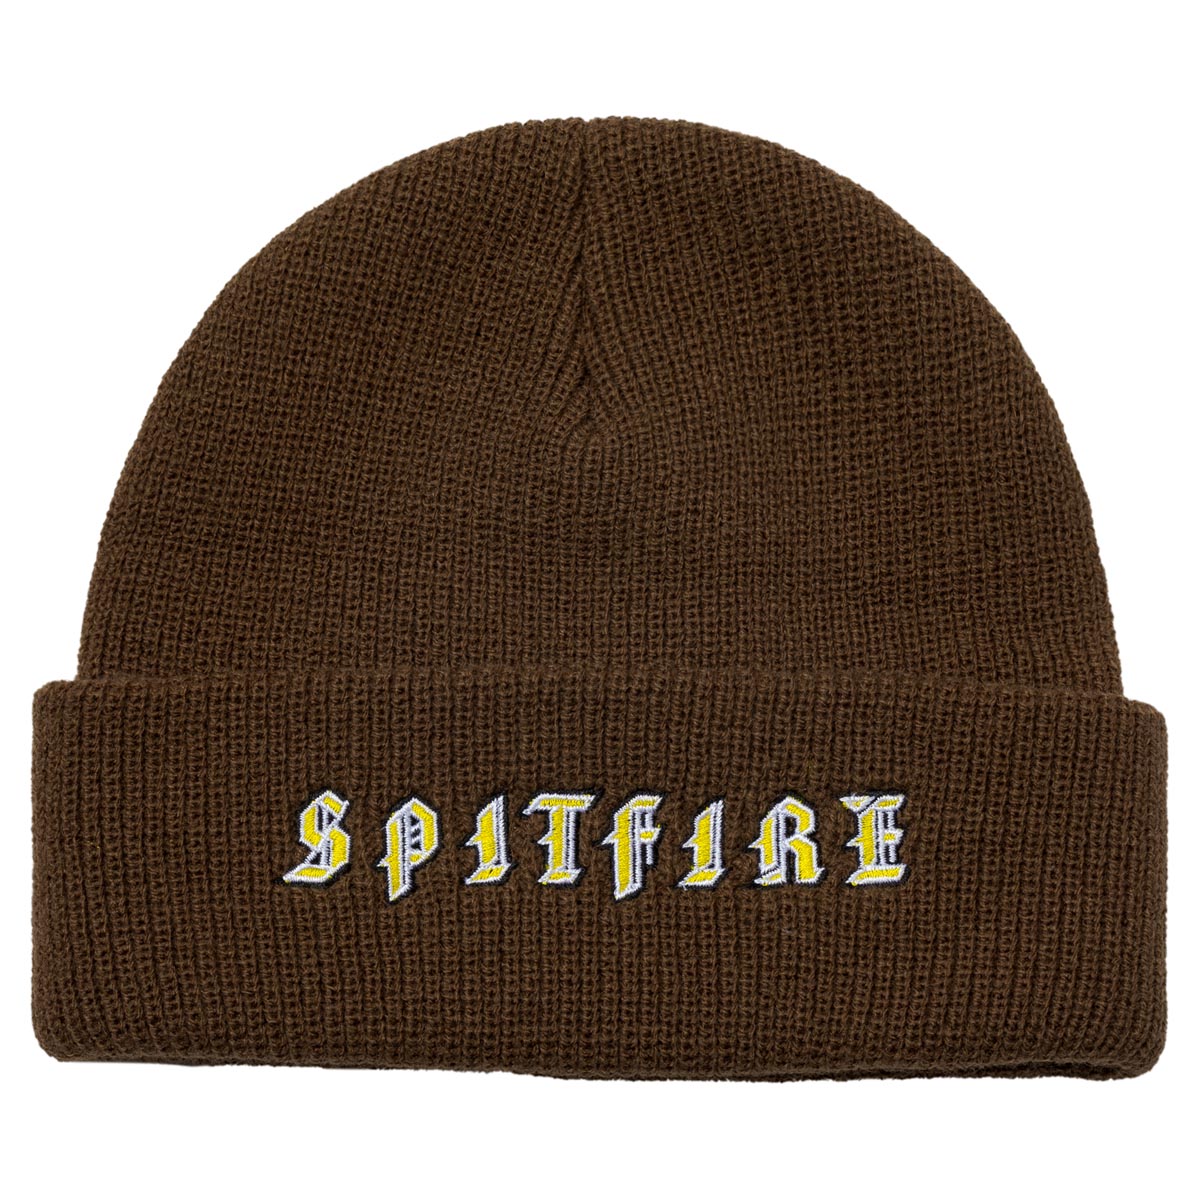 Spitfire Old E Beanie - Brown image 1